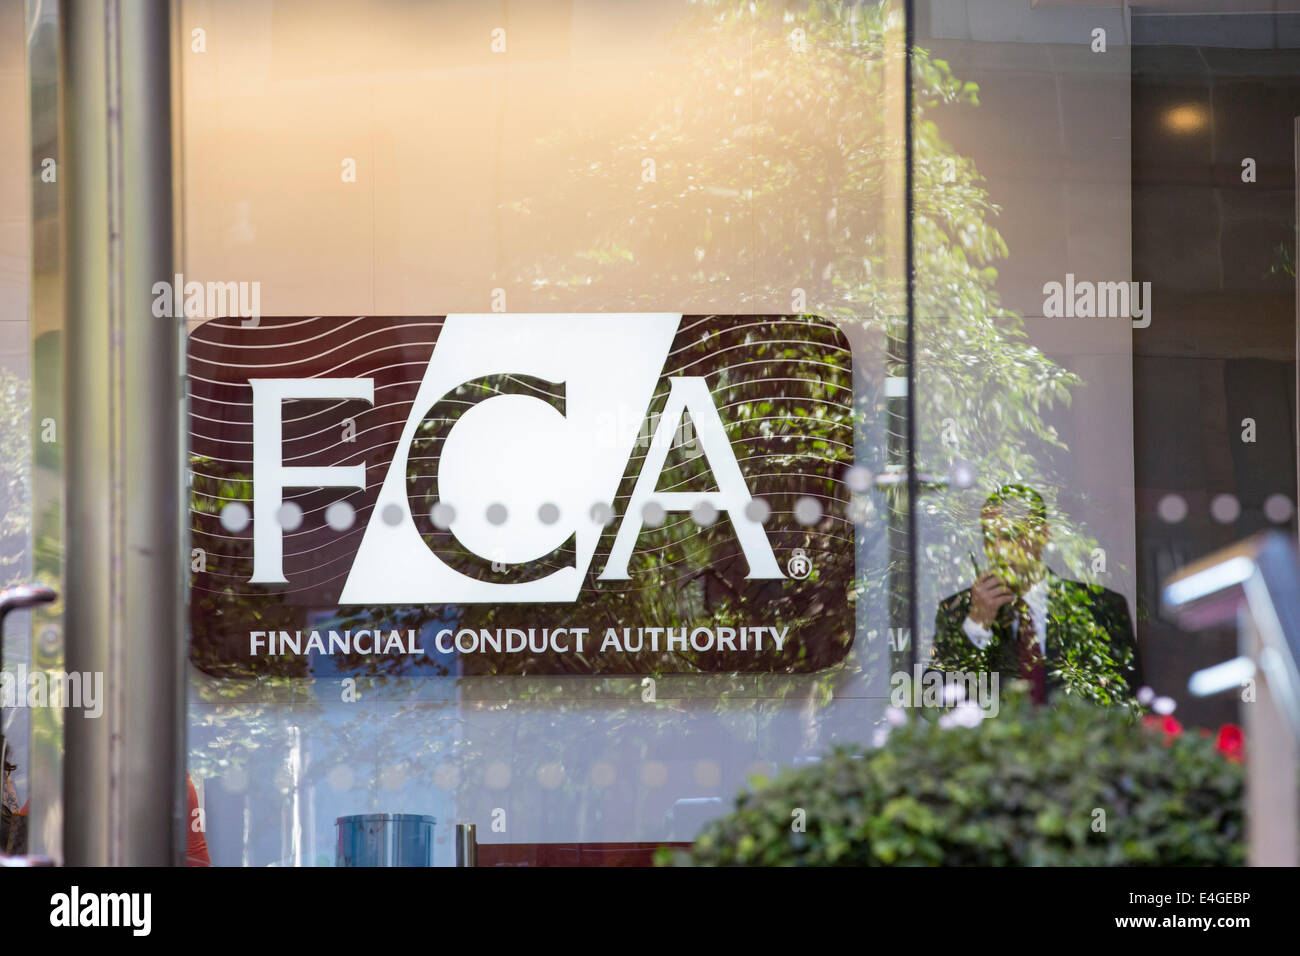 The FCA, Financial Conduct Authority, in Canary Wharf, London, UK. Stock Photo